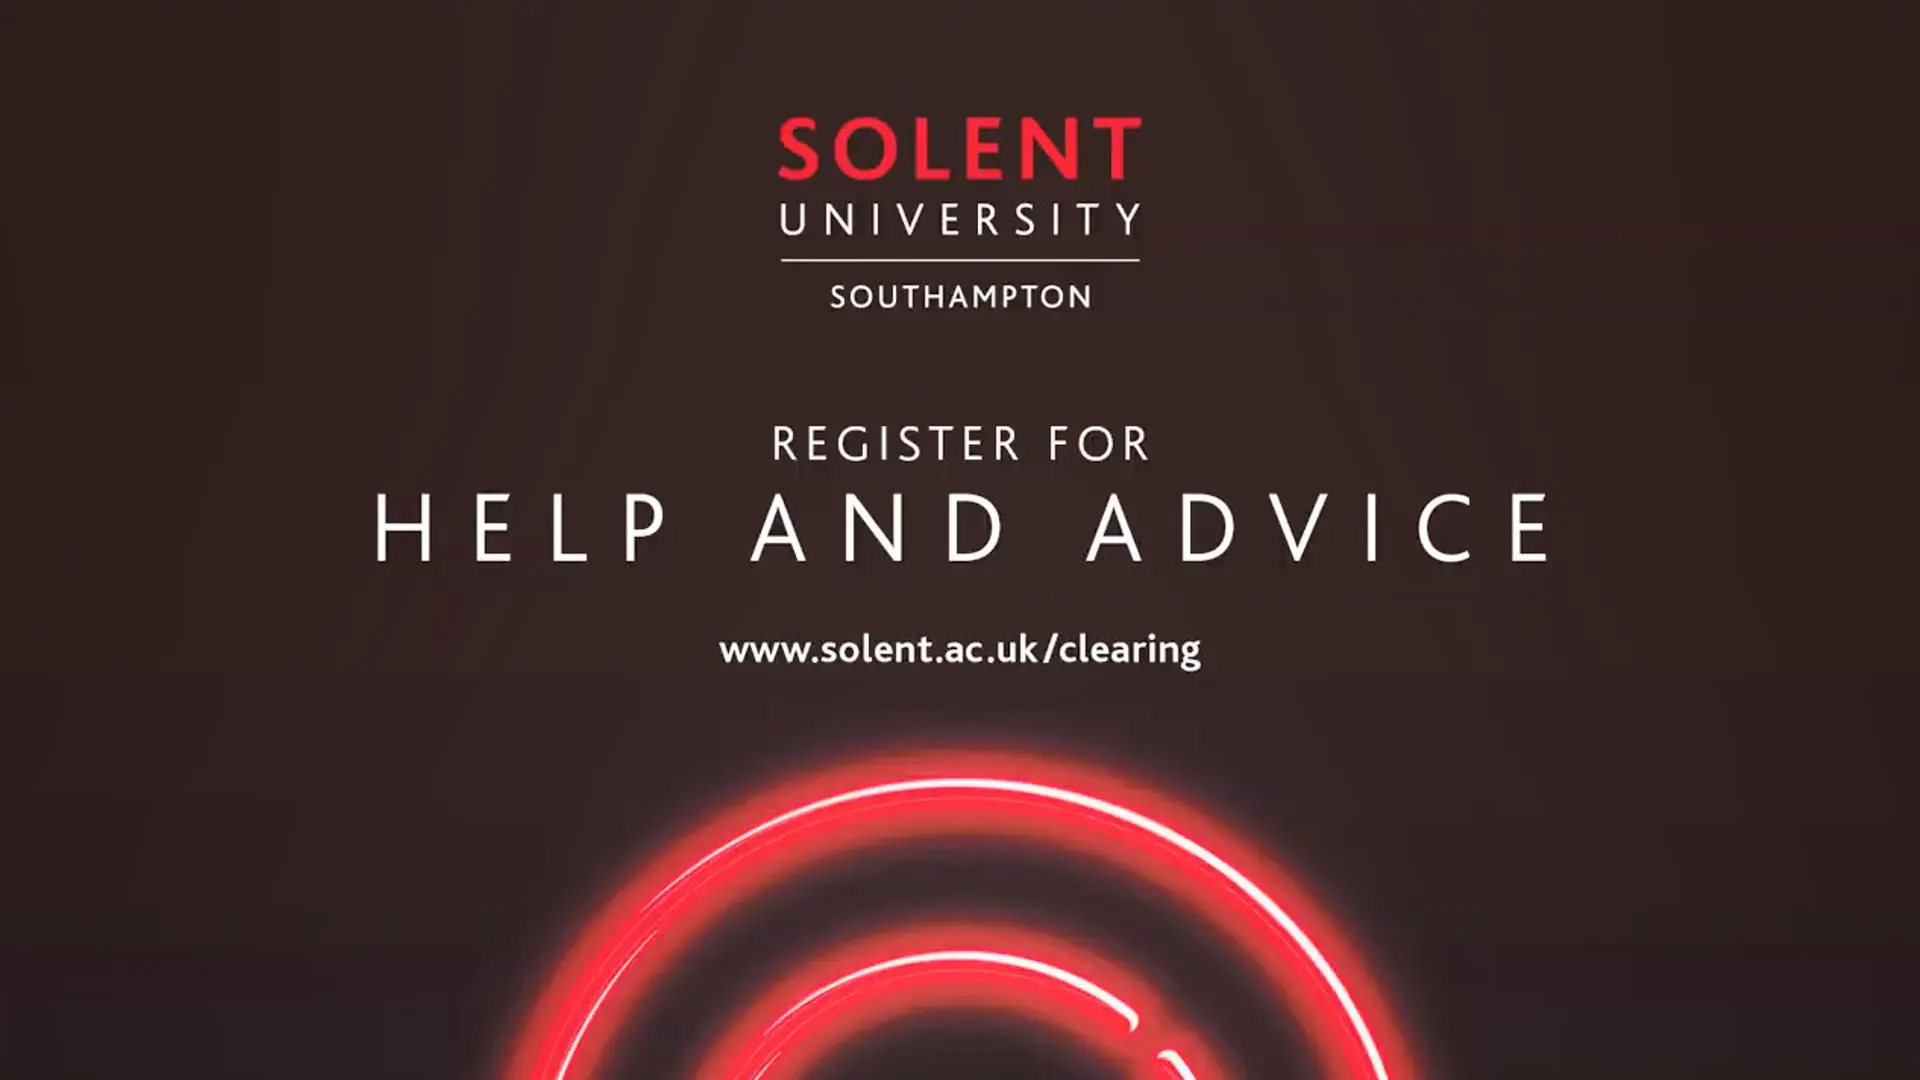 A graphic that says, 'Register for help and advice', www.solent.ac.uk/clearing, with the Solent University, Southampton logo at the top and a red neon semi-circle at the bottom.